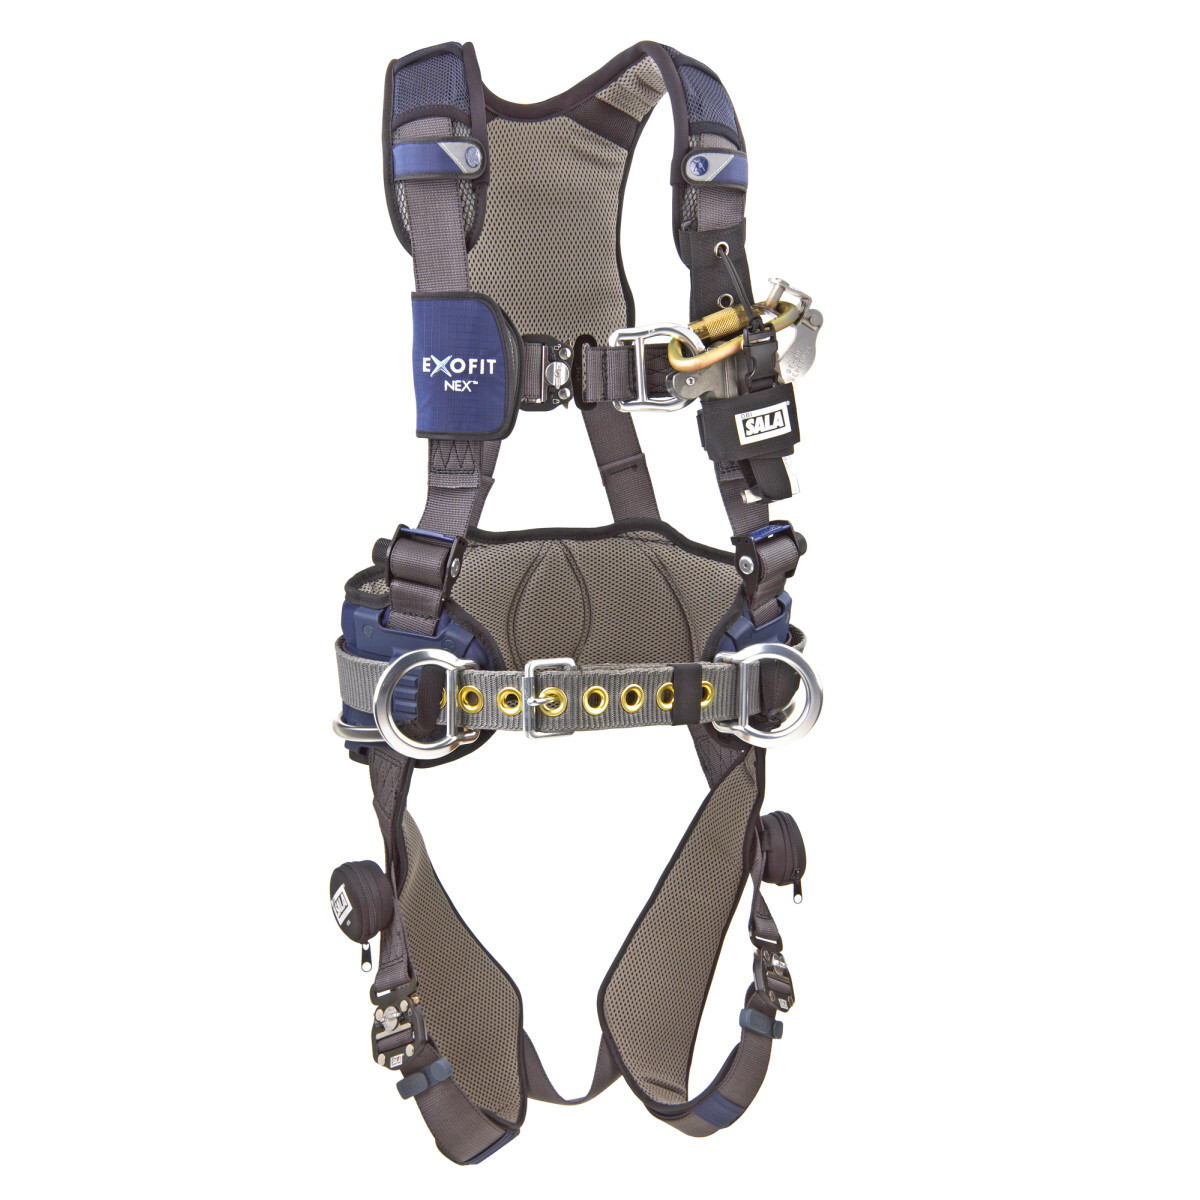 3M™ DBI-SALA® Large ExoFit NEX™ Full Body/Vest Style Harness With Tech-Lite™ Aluminum Back And Front D-Ring, Duo-Lok™ Quick Conn